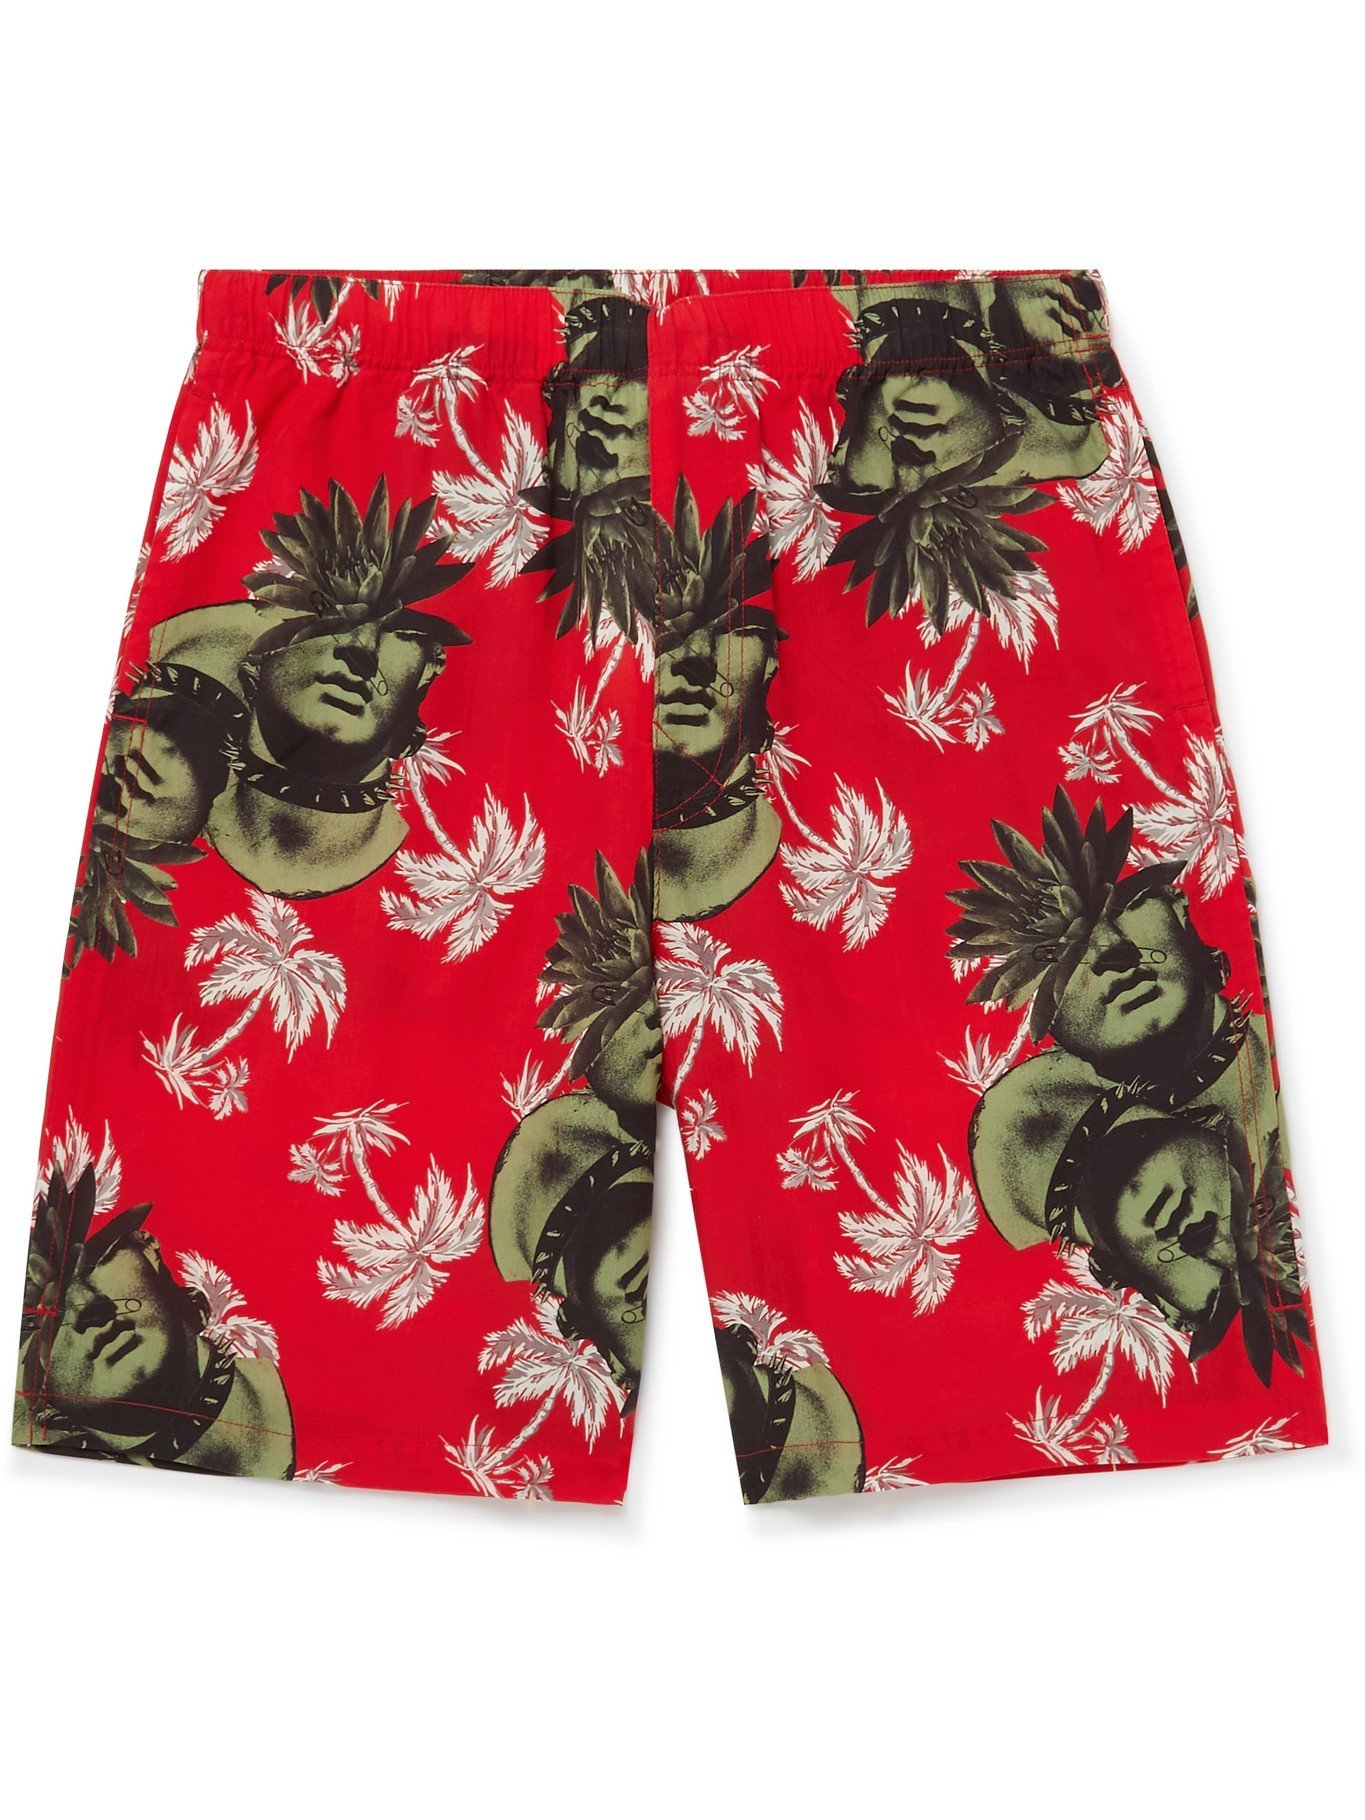 UNDERCOVER - Printed Cotton Shorts - Red - 3 Undercover